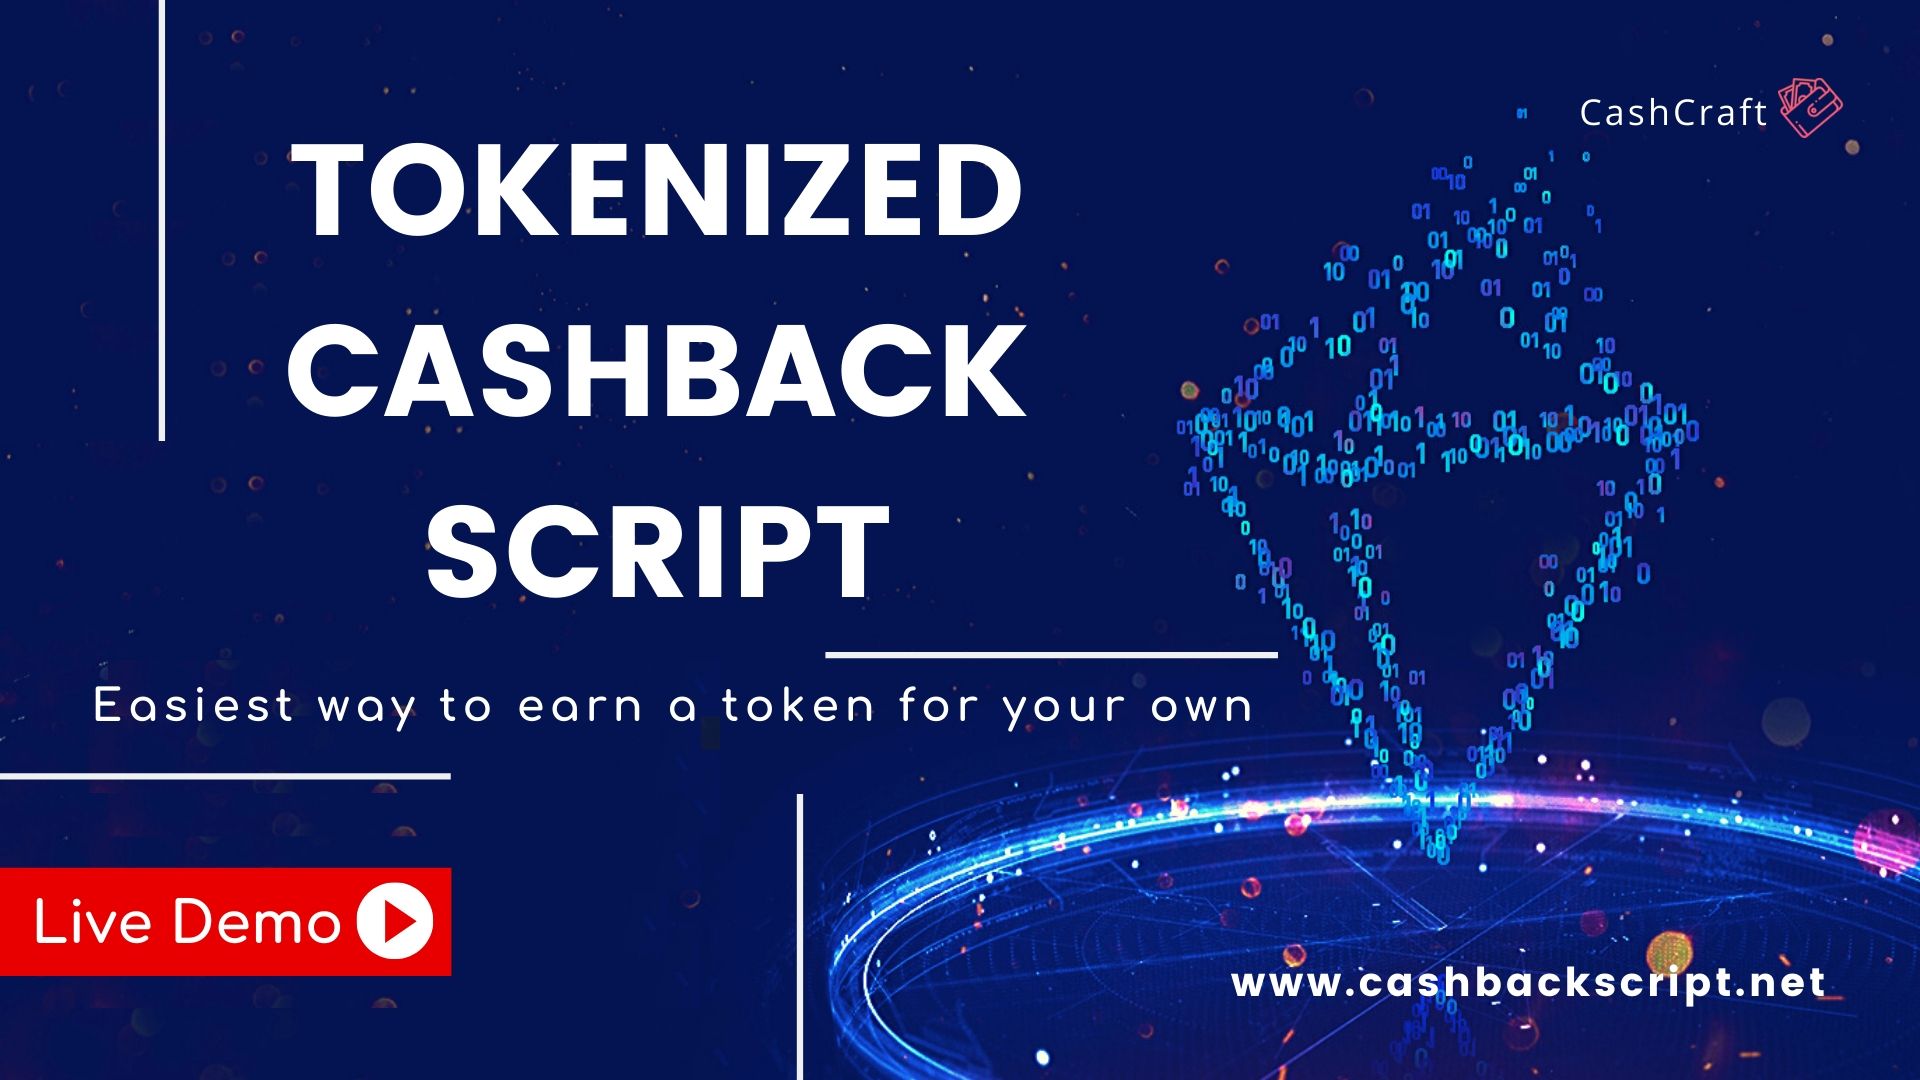 How Token can be a Game changer in Cashback Business?